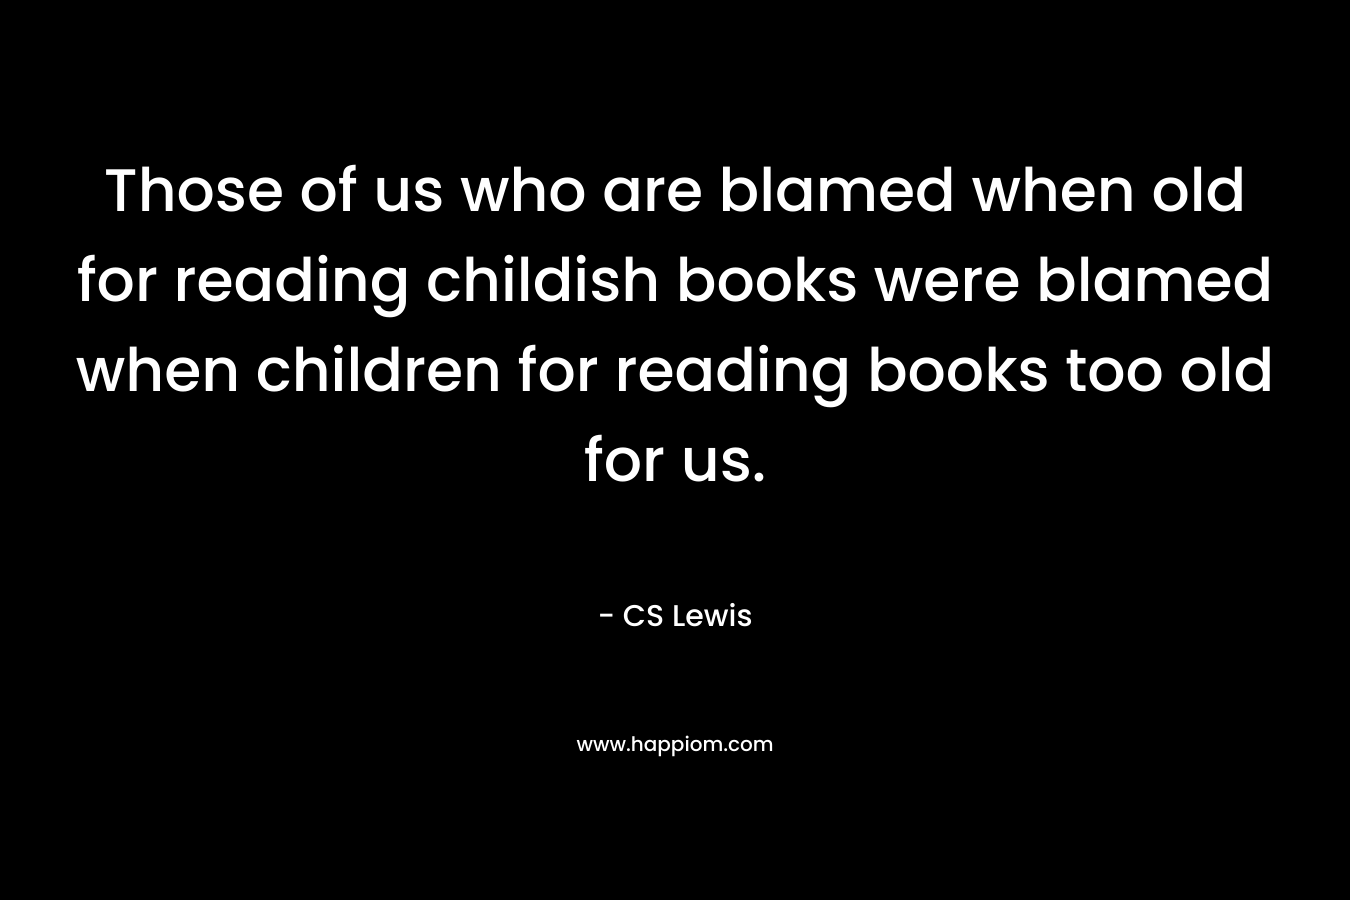 Those of us who are blamed when old for reading childish books were blamed when children for reading books too old for us.